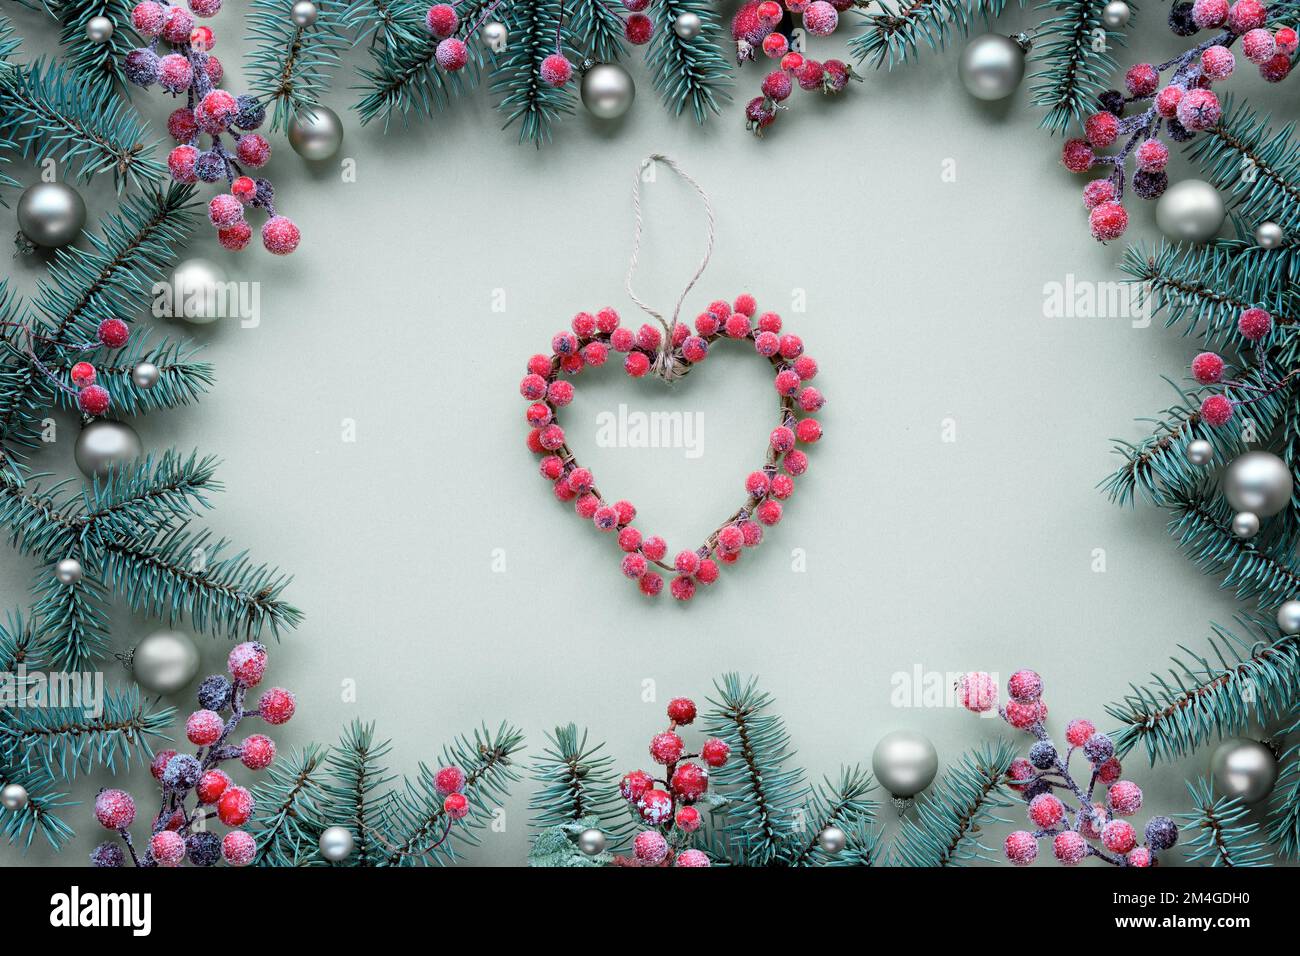 Christmas heart wreath made of berries. Frame with fir twigs and golden baubles, trinkets. Top view, flat lay, festive Xmas background on light mint Stock Photo